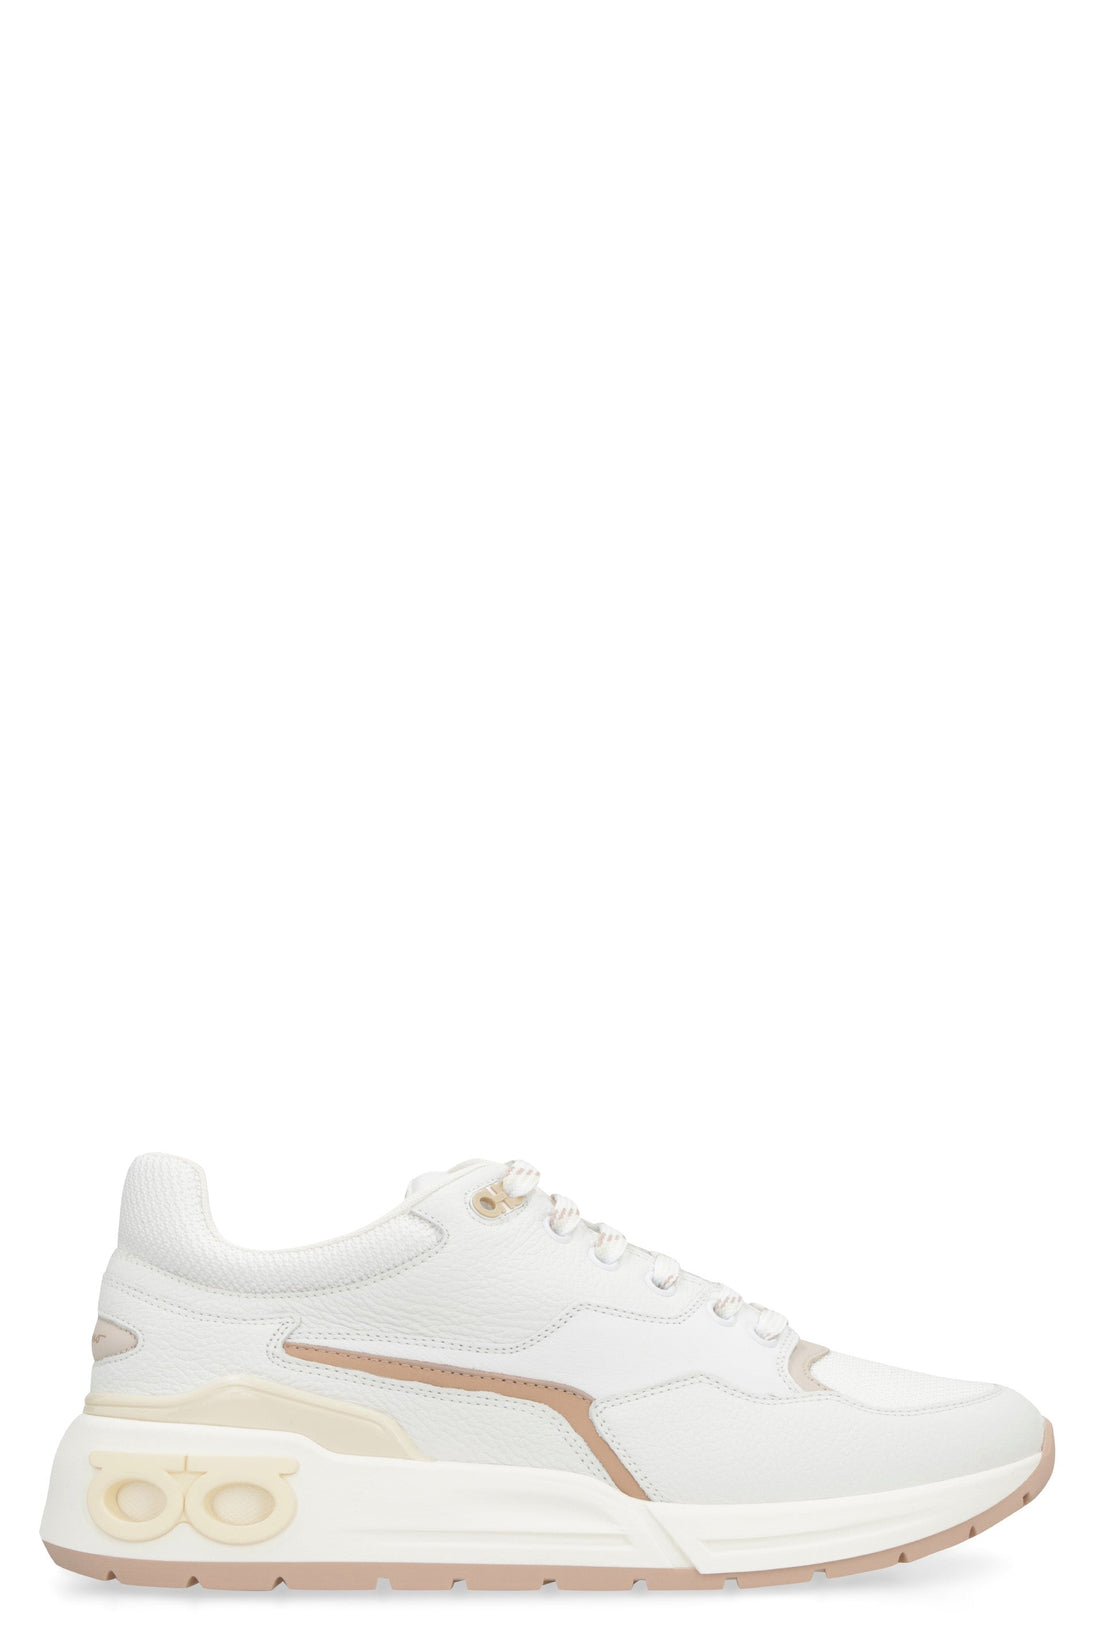 FERRAGAMO-OUTLET-SALE-Leather and fabric low-top sneakers-ARCHIVIST